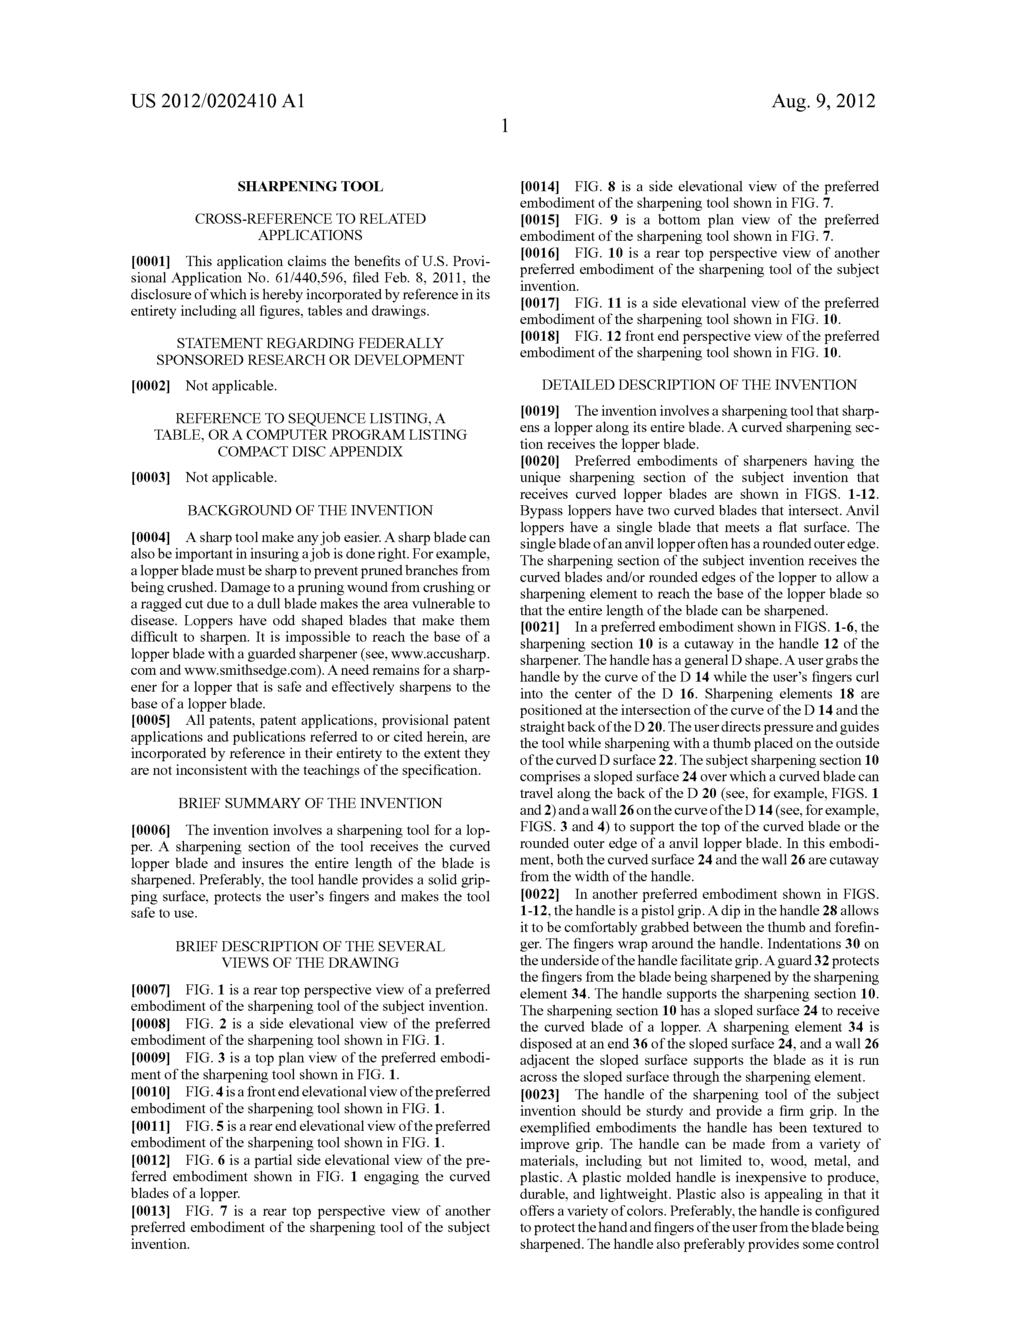 US 2012/0202410 A1 Aug. 9, 2012 SHARPENING TOOL CROSS-REFERENCE TO RELATED APPLICATIONS 0001. This application claims the benefits of U.S. Provi sional Application No. 61/440,596, filed Feb.